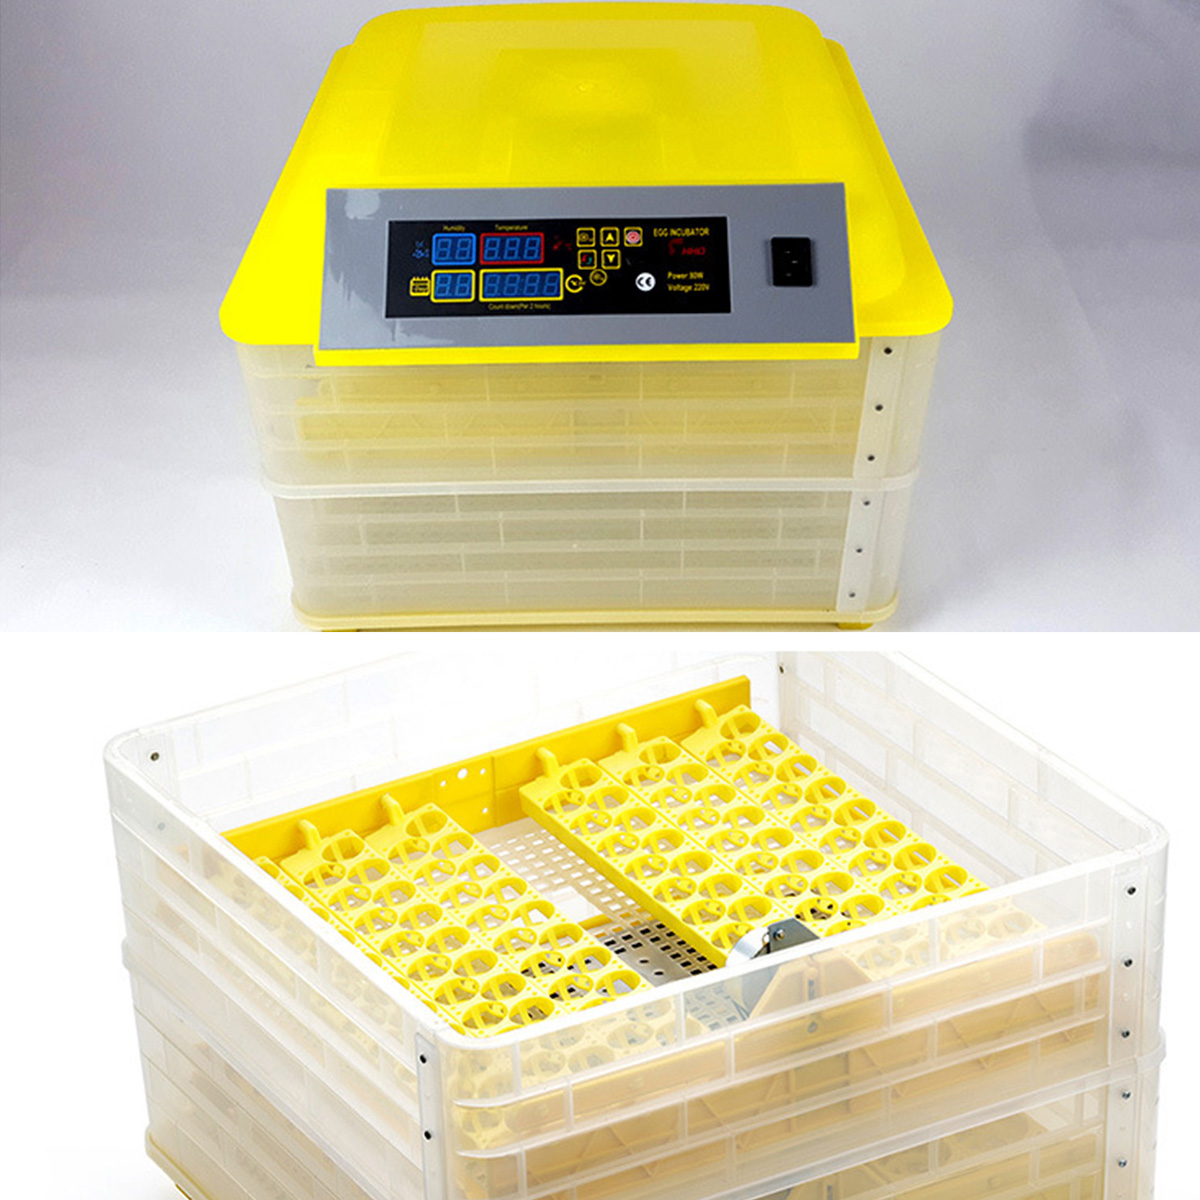 Poultry-96-Egg-Incubator-Alarm-Function-Hatching-One-Incubator-220V-1671596